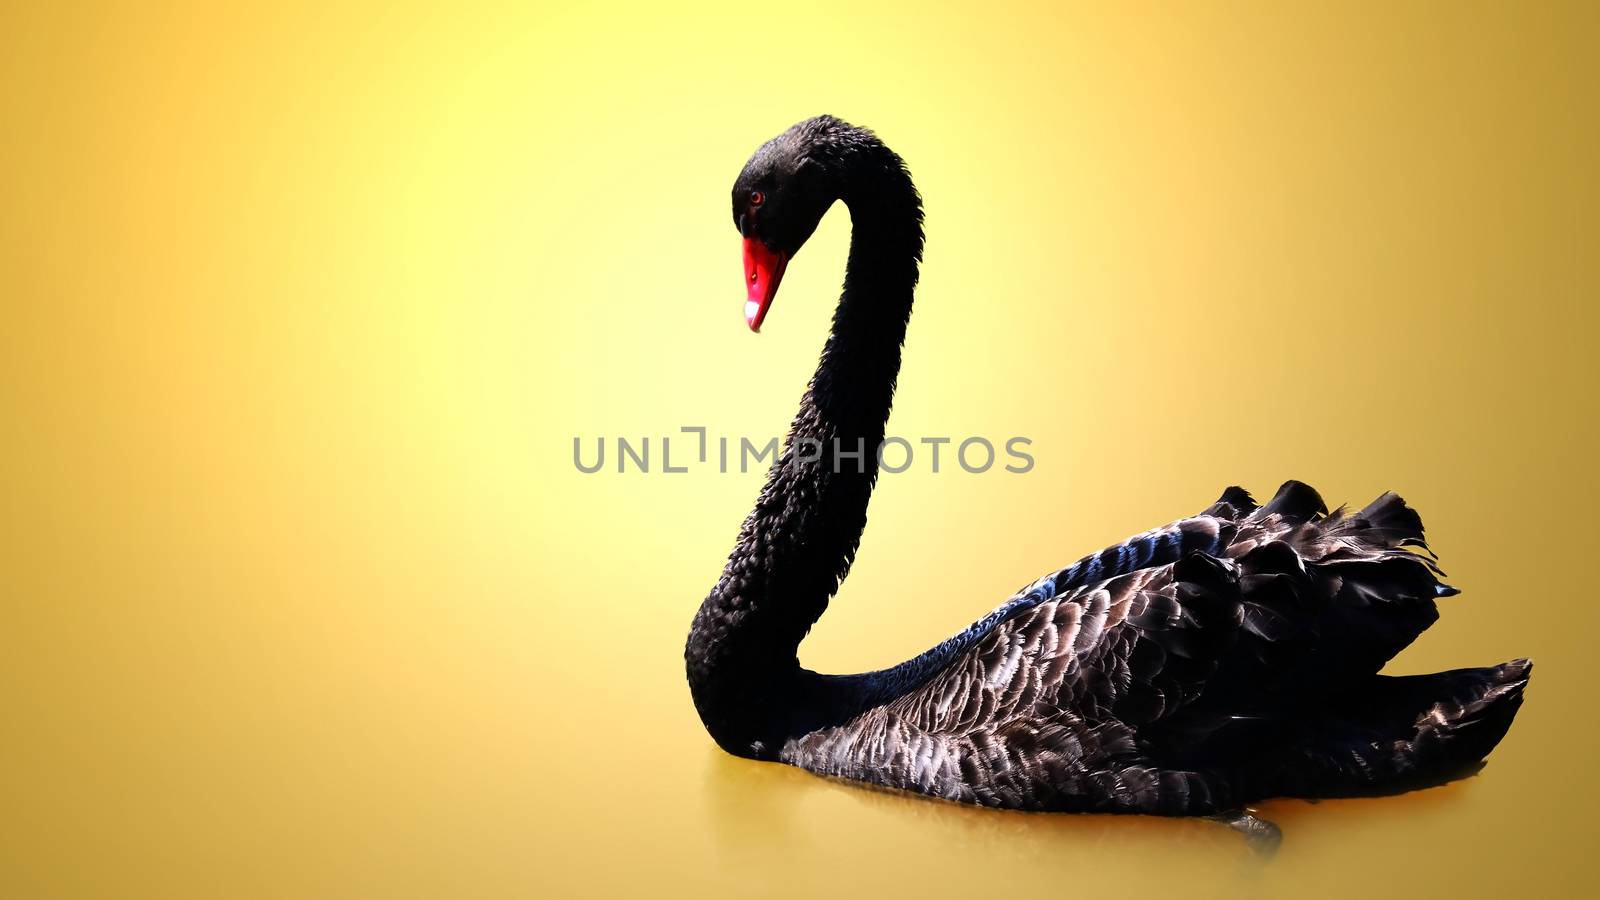 Black swans are swimming with Yellow background